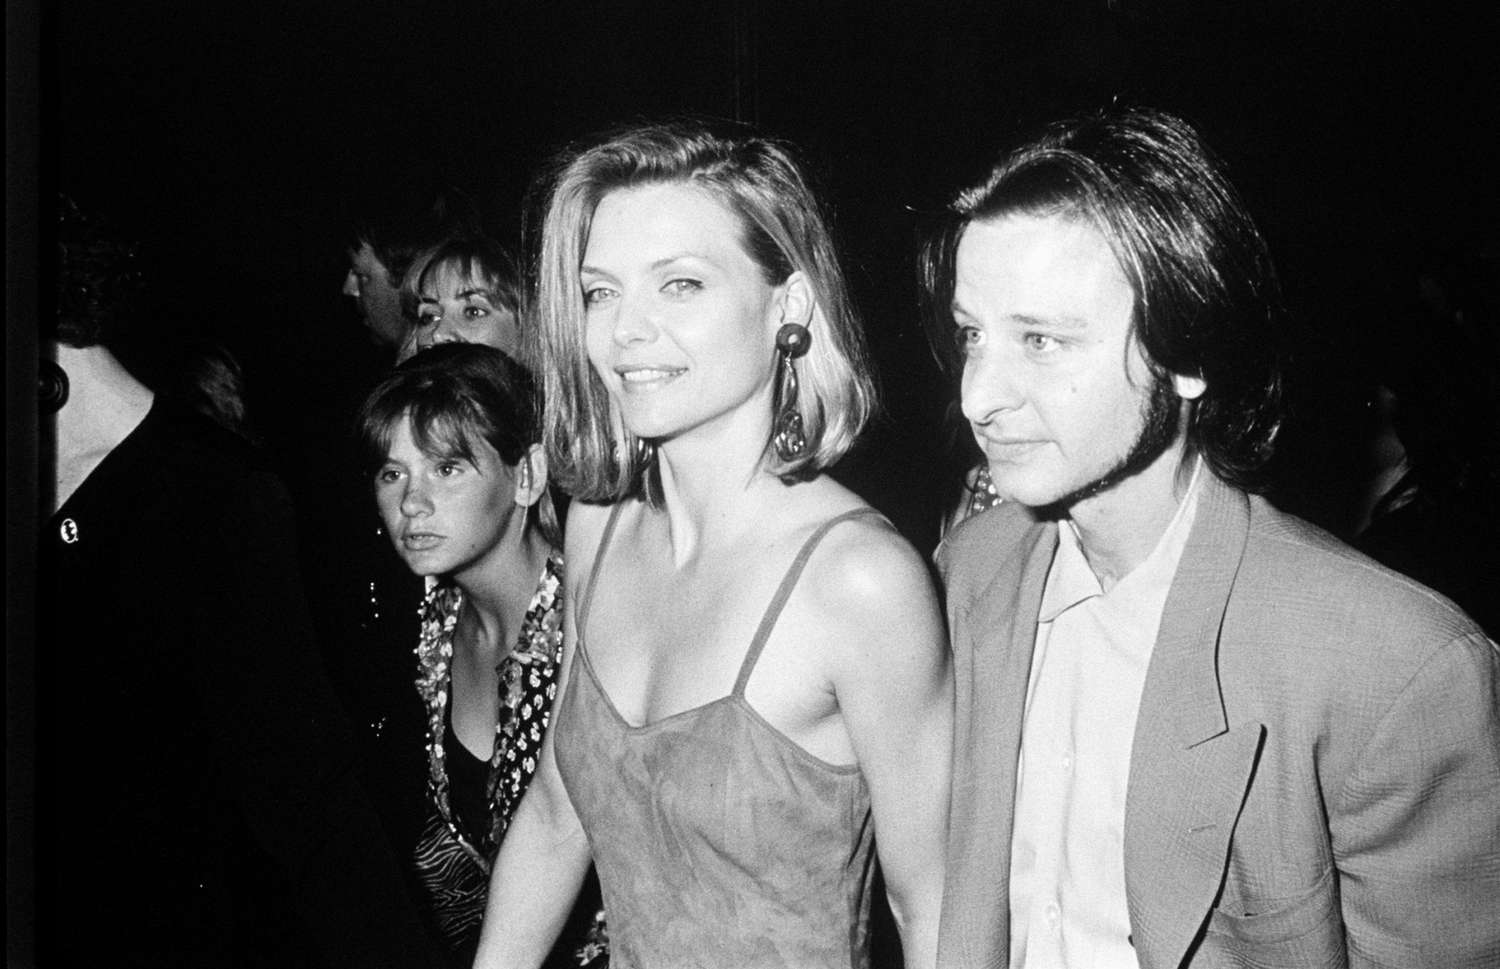 Fisher Steven and Michelle Pfeiffer Breakup. Love story Of The 90s Couple. 